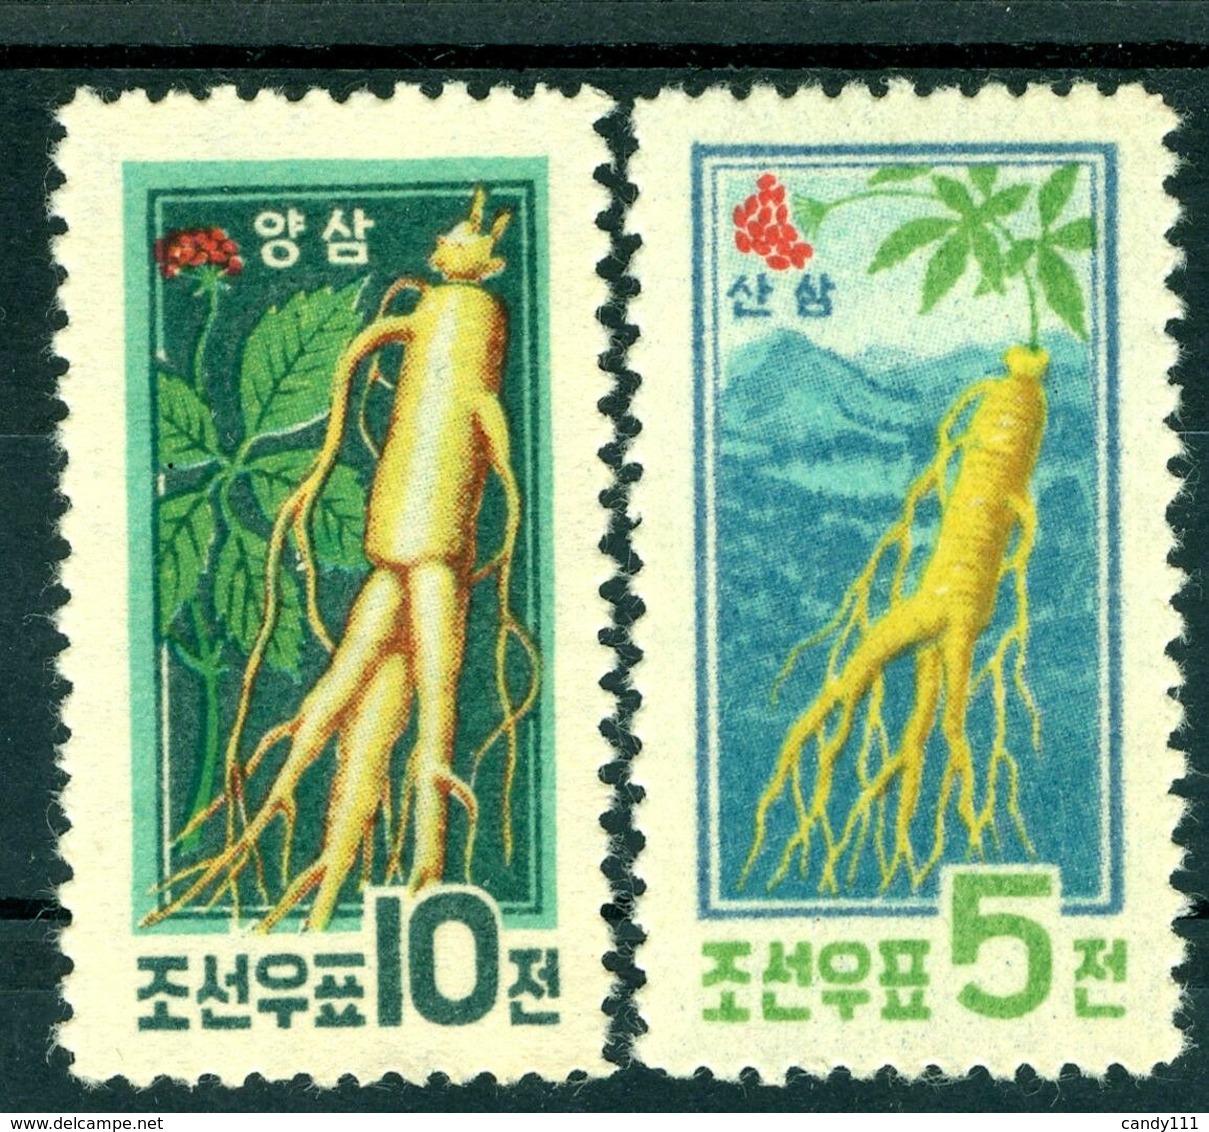 1961 Ginseng,Wild And Domestic Ginseng,the ROOT Of Life,Korea,Mi.276,CV$14,MNH - Vegetables